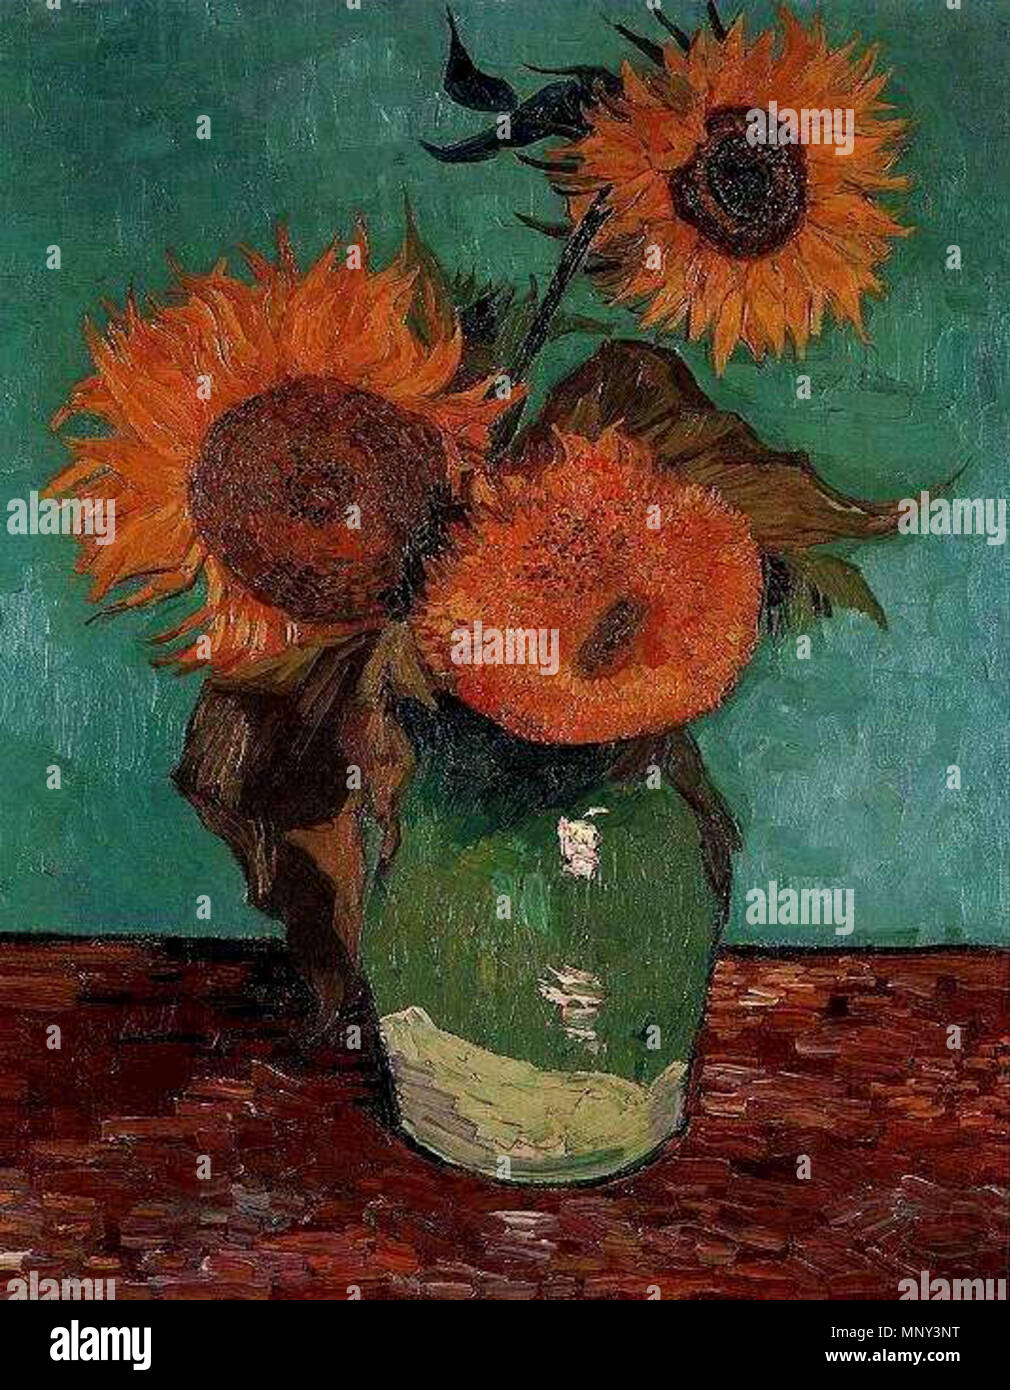 English: Vase with Three Sunflowers Vincent van Gogh (1853–1890)  Alternative names Vincent Willem van Gogh Description Dutch painter, drawer  and printmaker Date of birth/death 30 March 1853 29 July 1890 Location